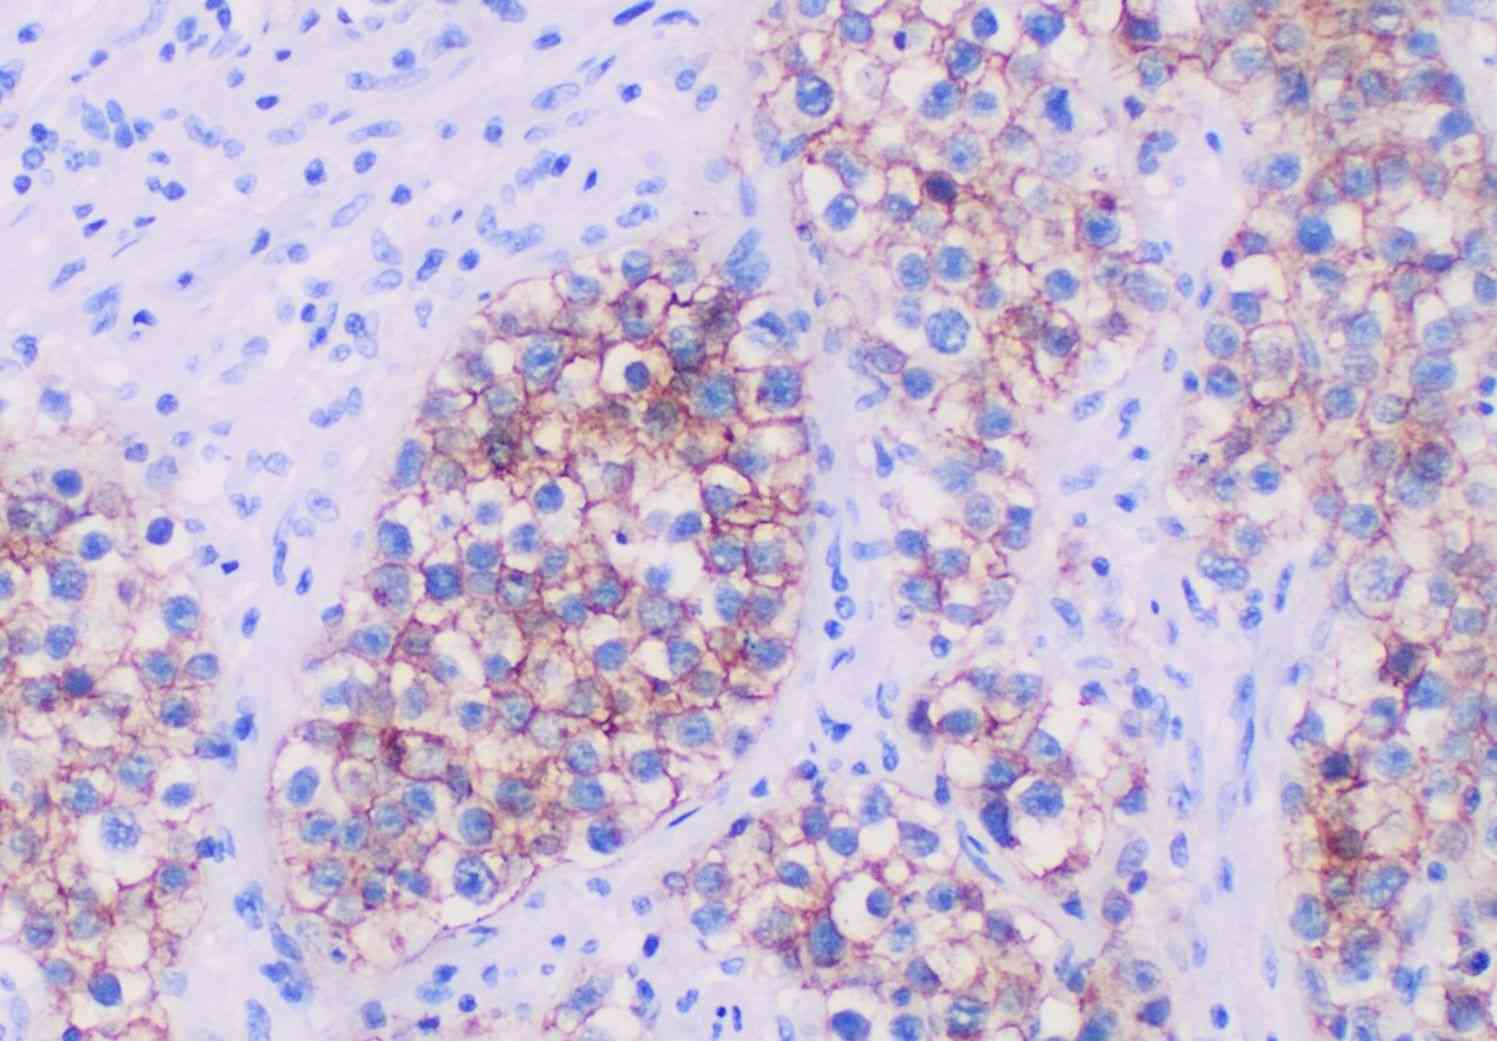 Fig.3 Primary cultures for IHC-viability assays. (By Mikael Häggström, M.D. - Own work, CC0, https://commons.wikimedia.org/wiki/File:Positive_CD117_immunohistochemistry_in_seminoma.jpg)